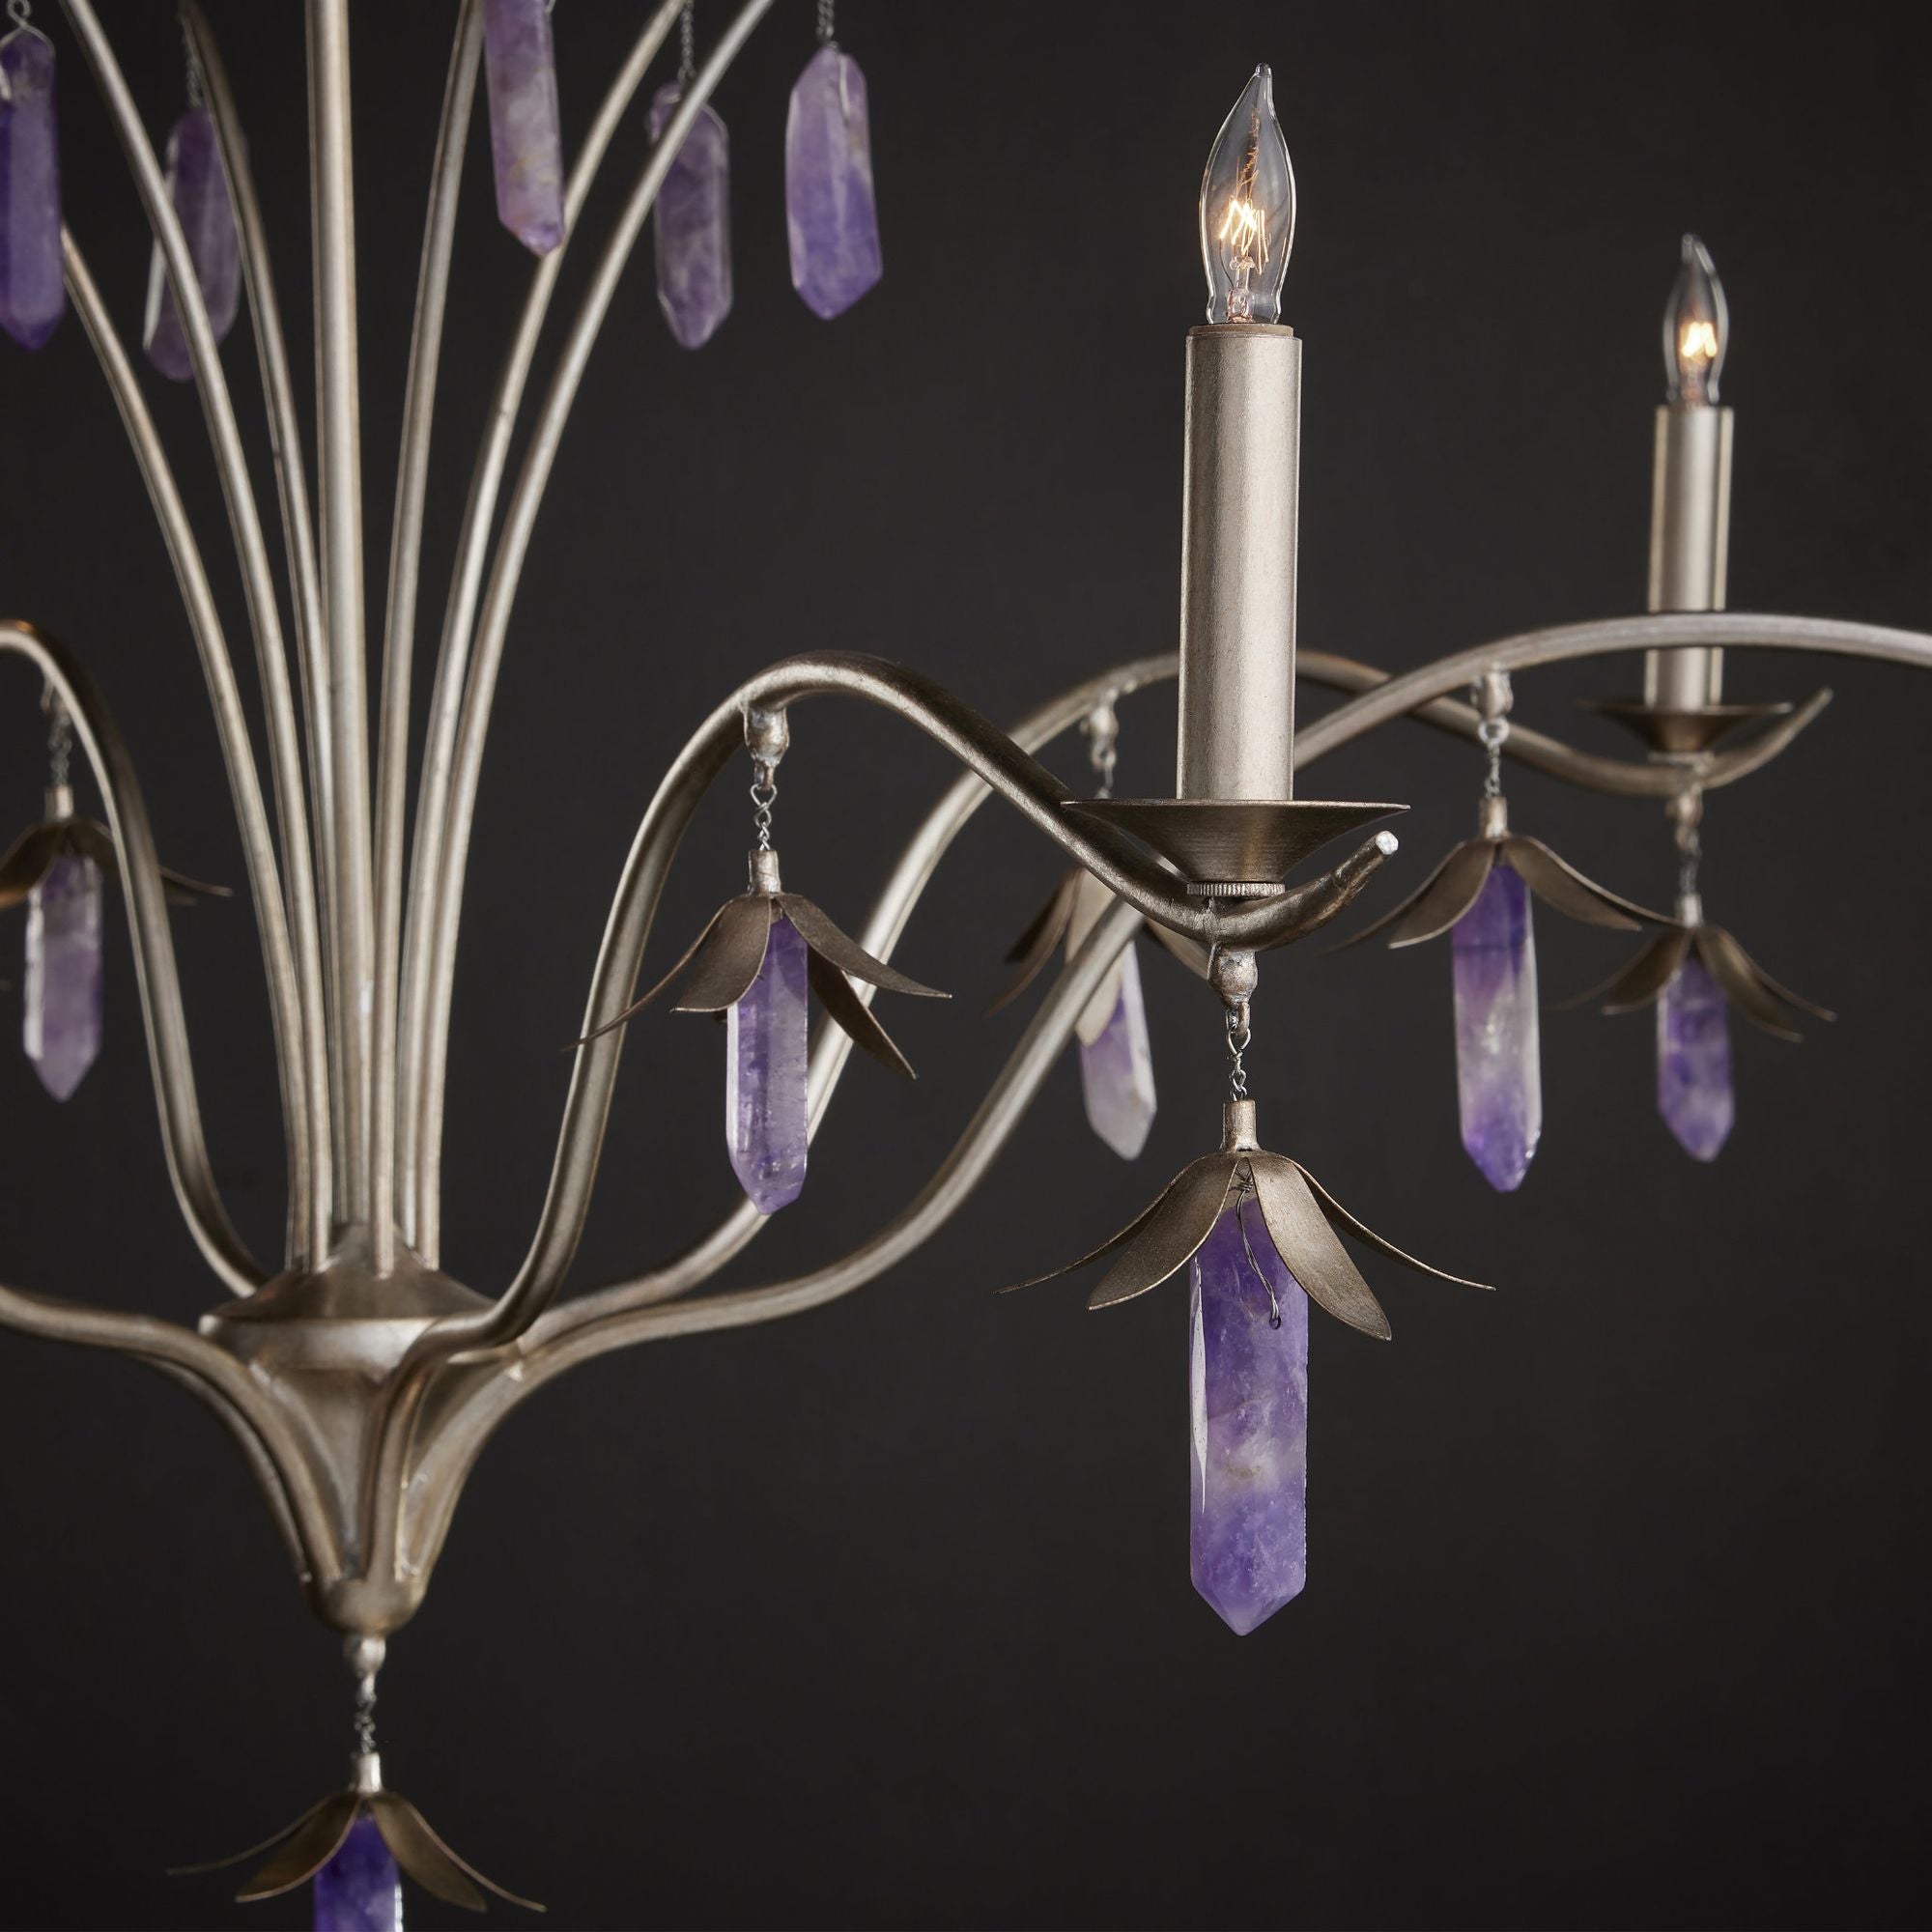 Lilah Champagne Chandelier - Champagne